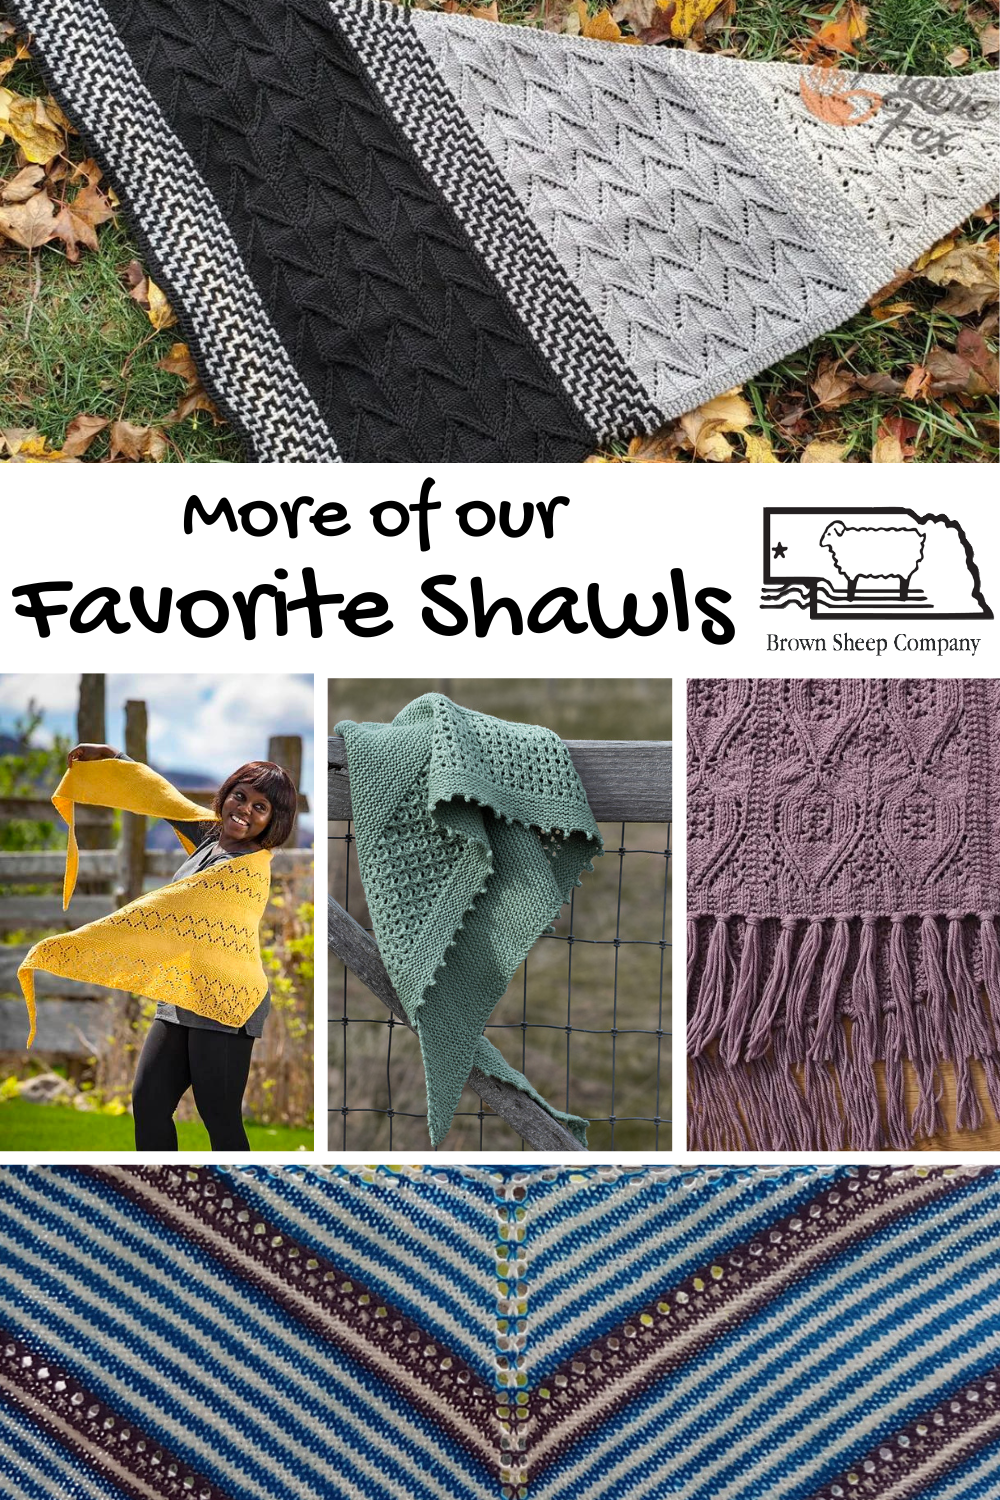 MORE of our Favorite Shawls - Brown Sheep Company, Inc.